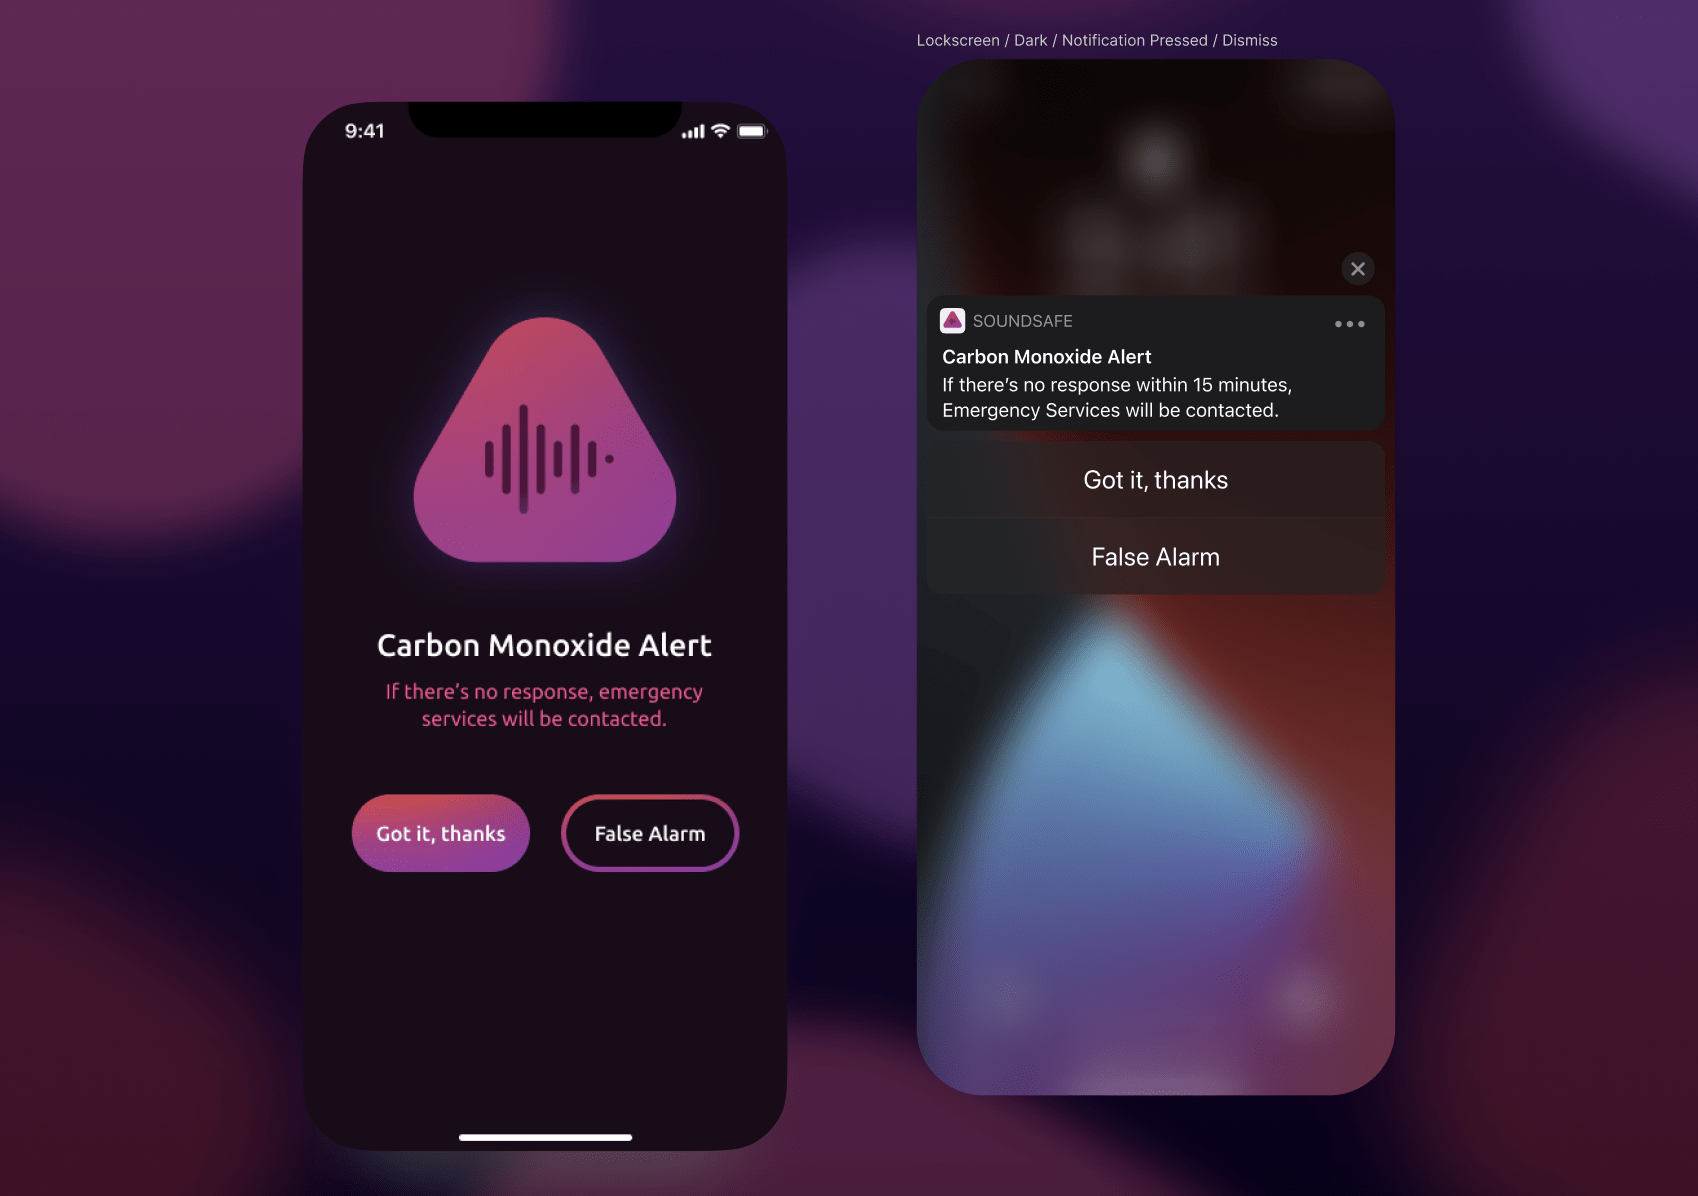 Screenshots of the SoundSafe App showing alert and notification